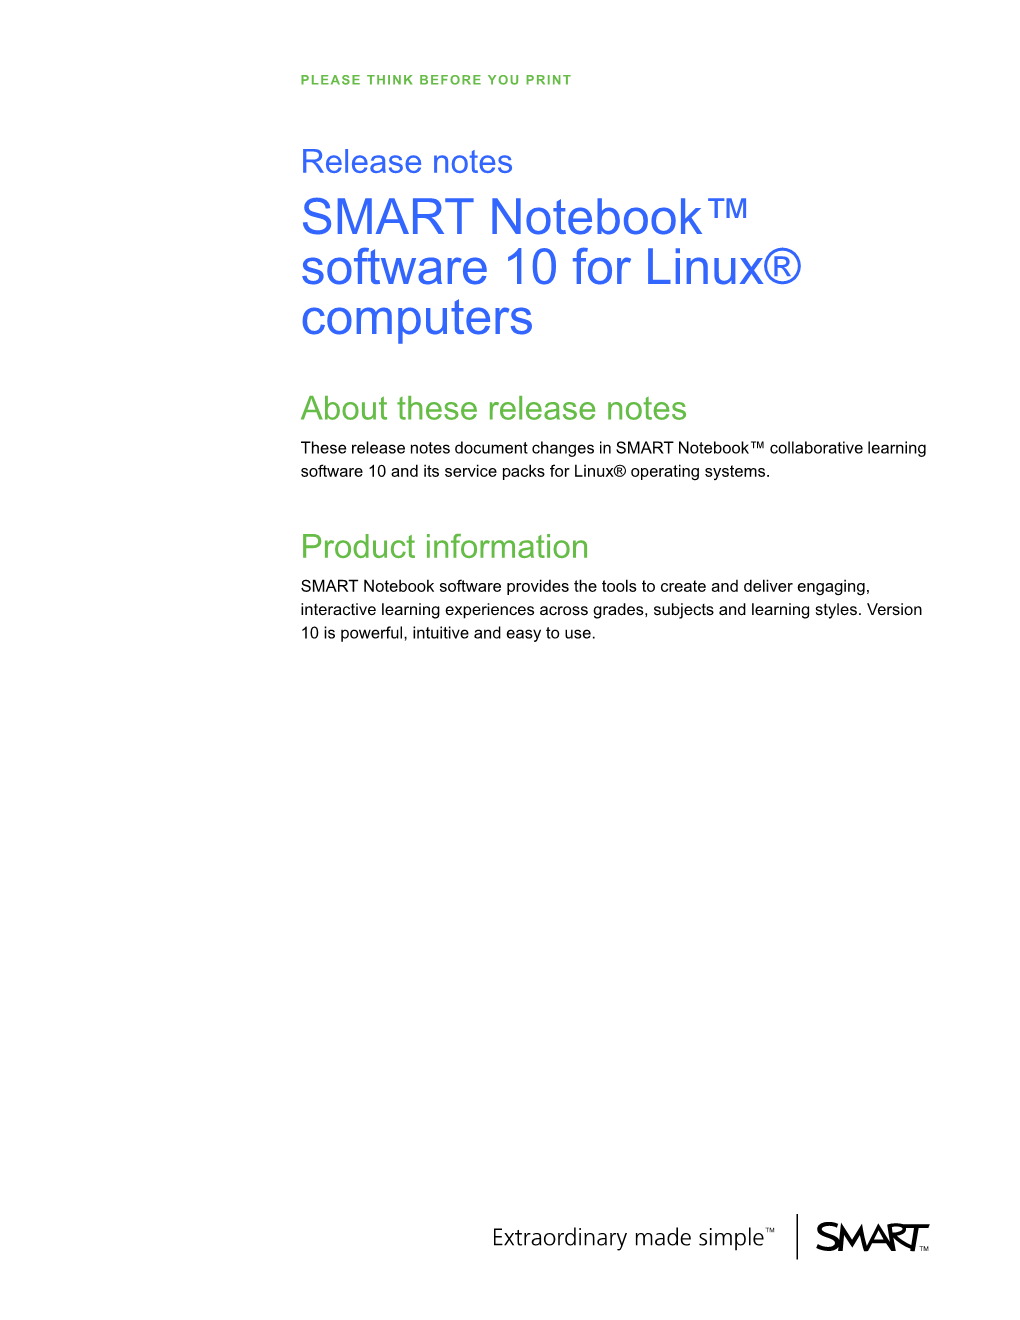 SMART Notebook Software 10 for Linux Computers Release Notes